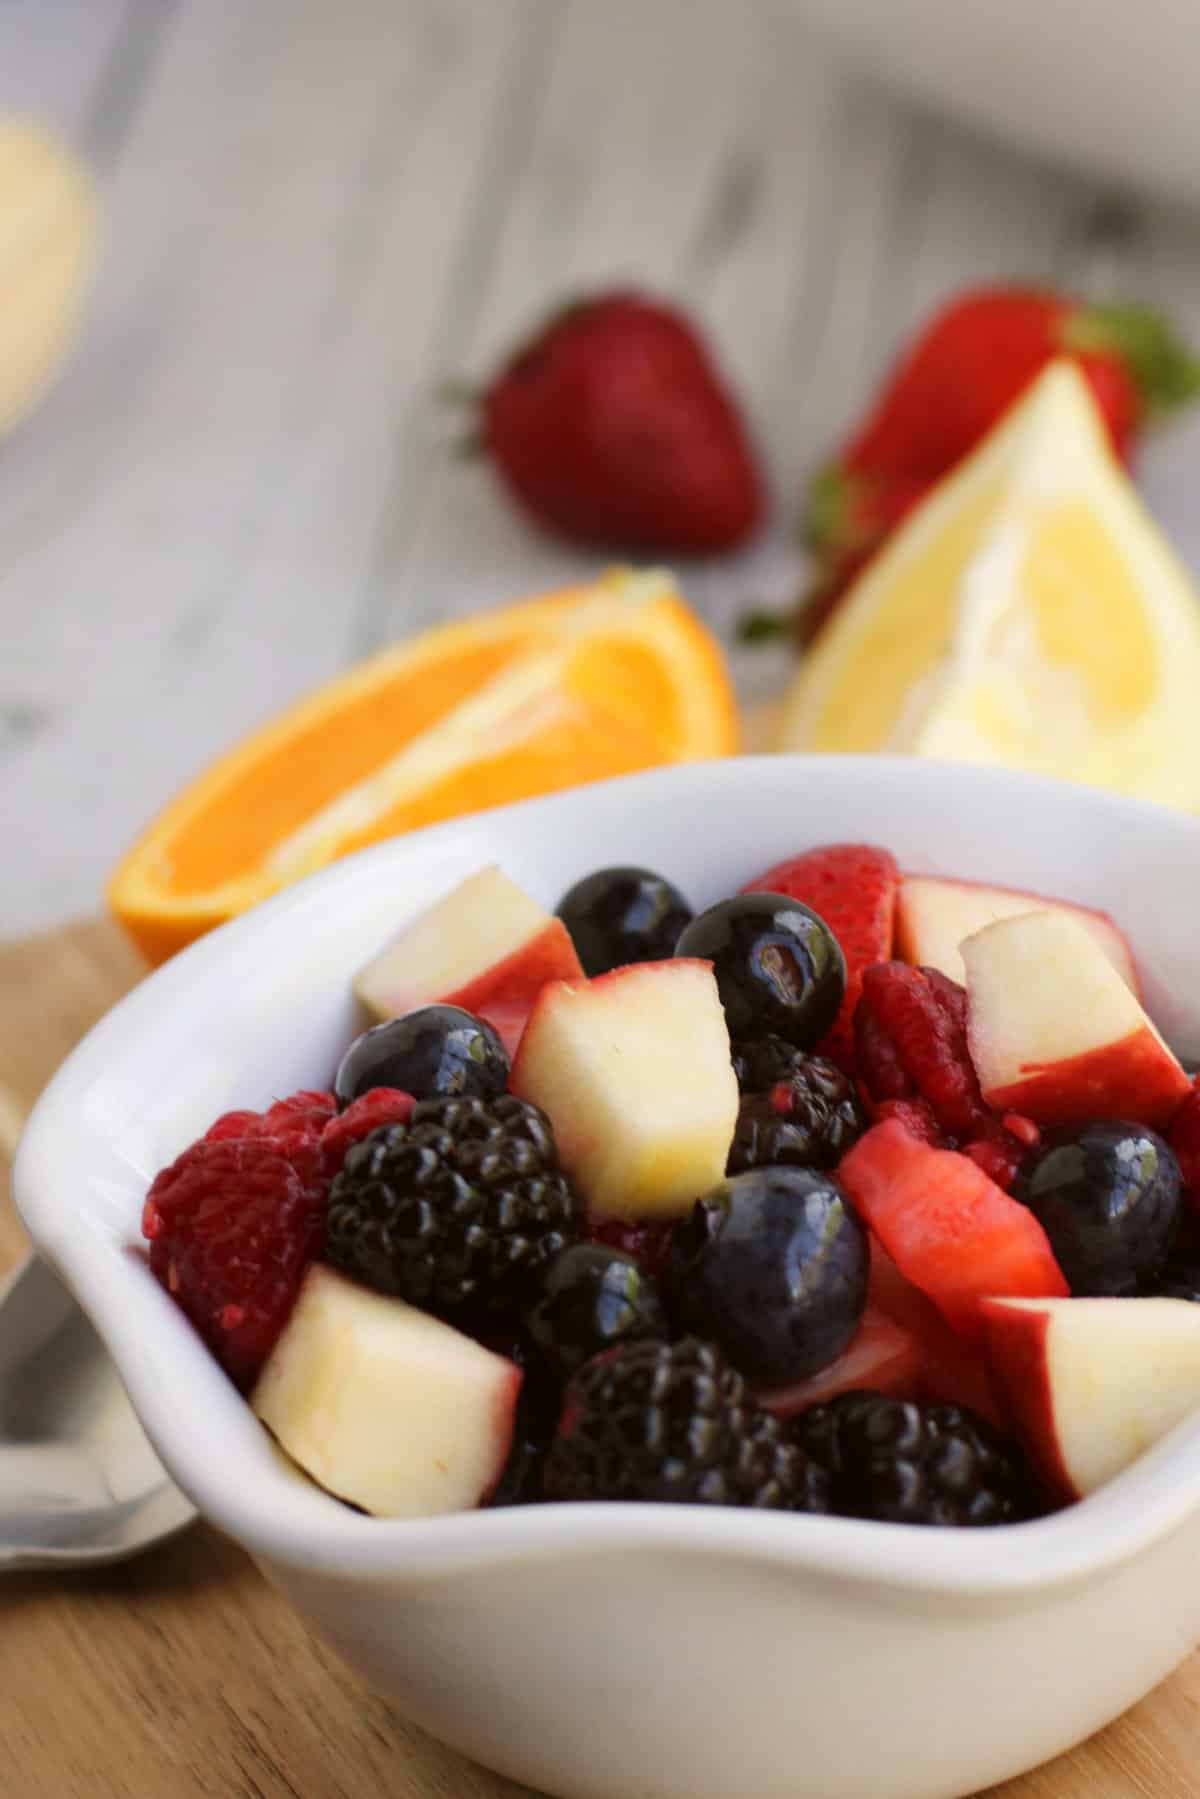 white bowl of summer fruit salad of berries and diced apples with oranges and strawberries in the background